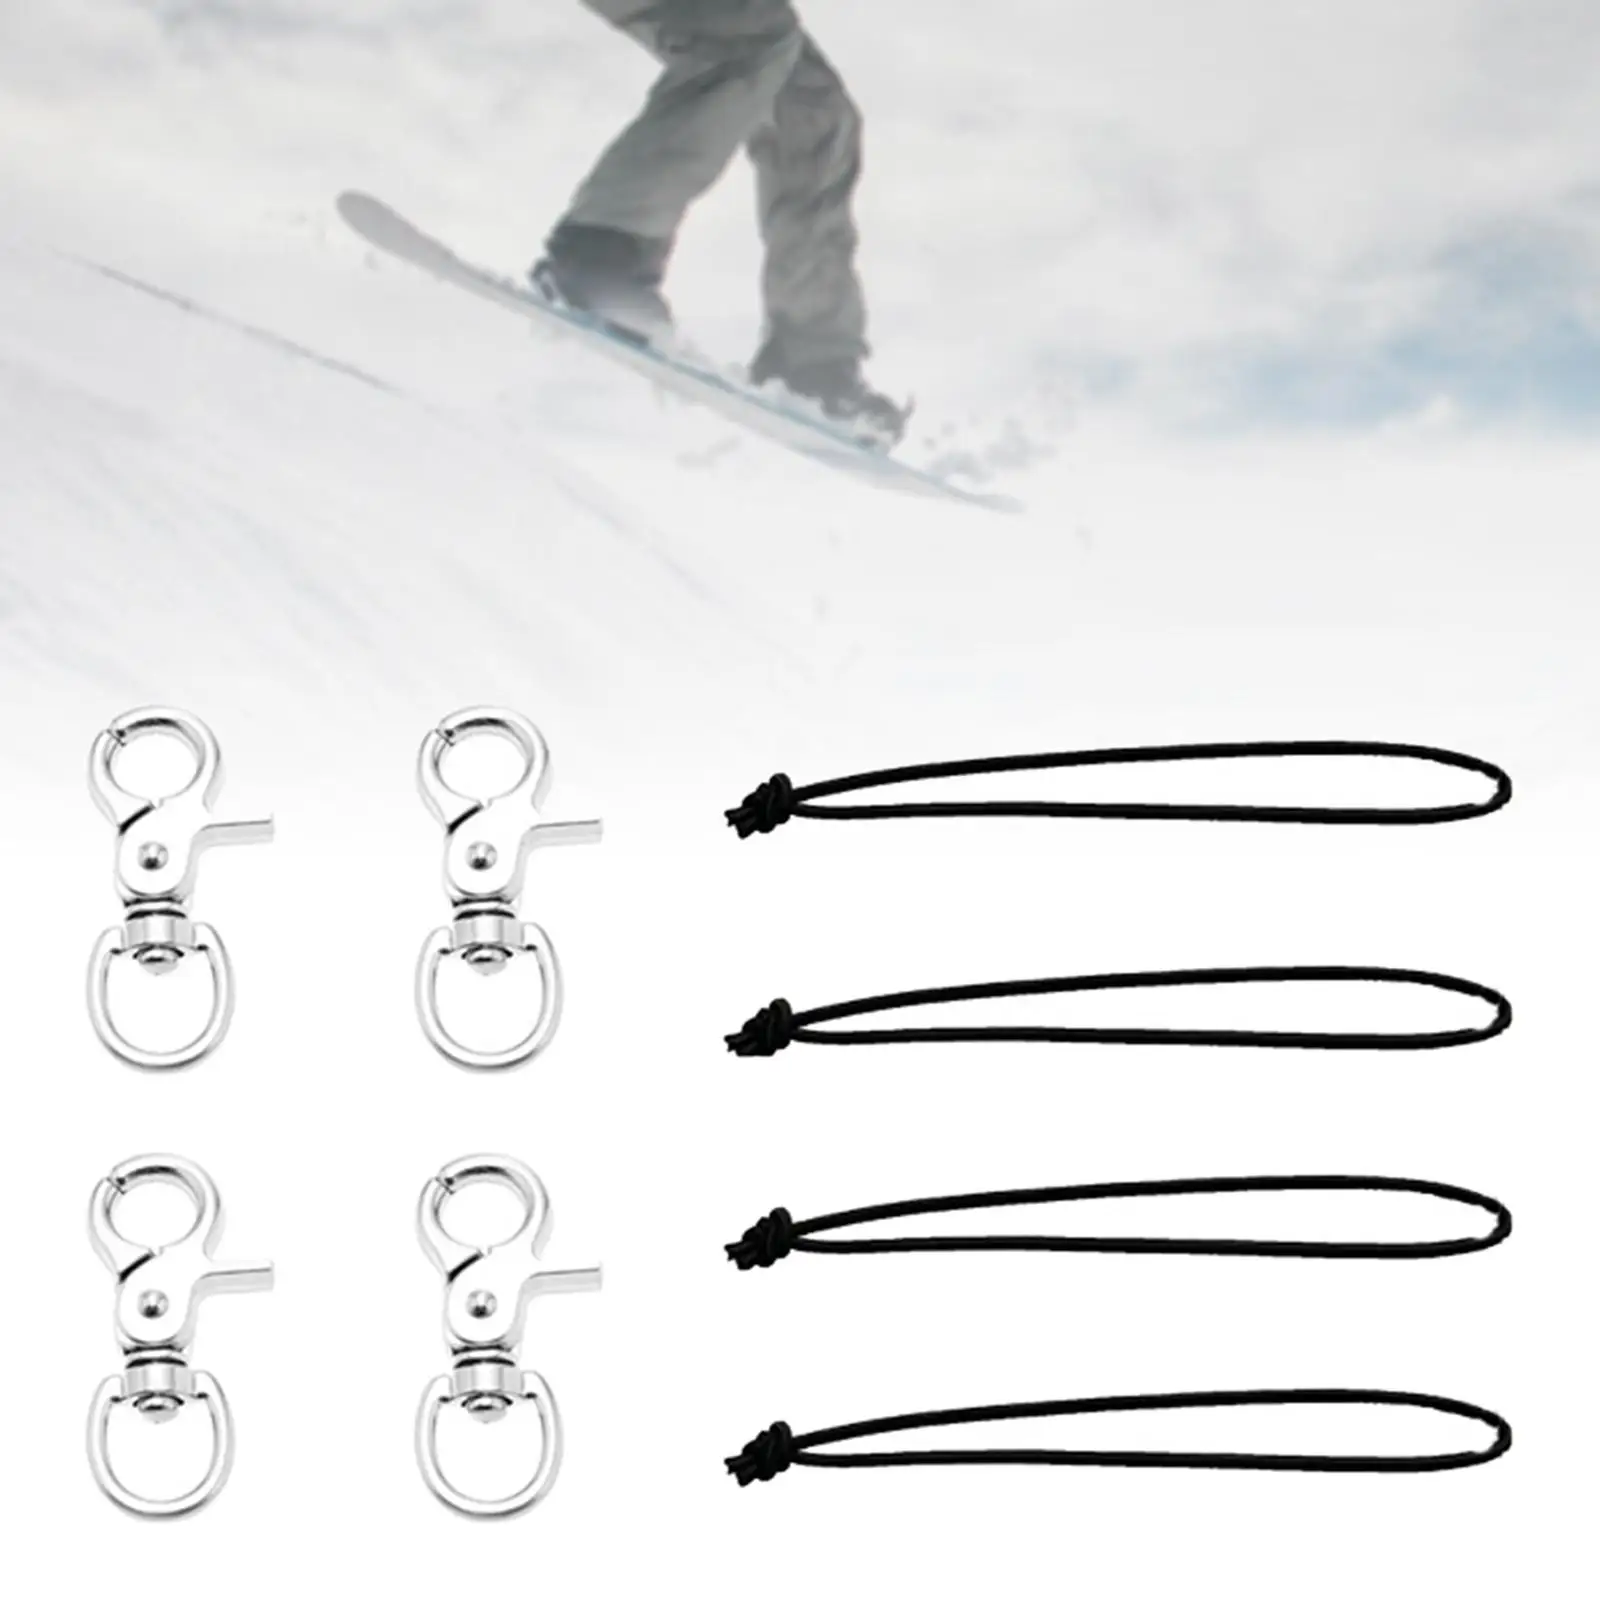 4 Pieces Practical Snowboard Leash Cord Accessories Connecting Rope for Tents Beginners